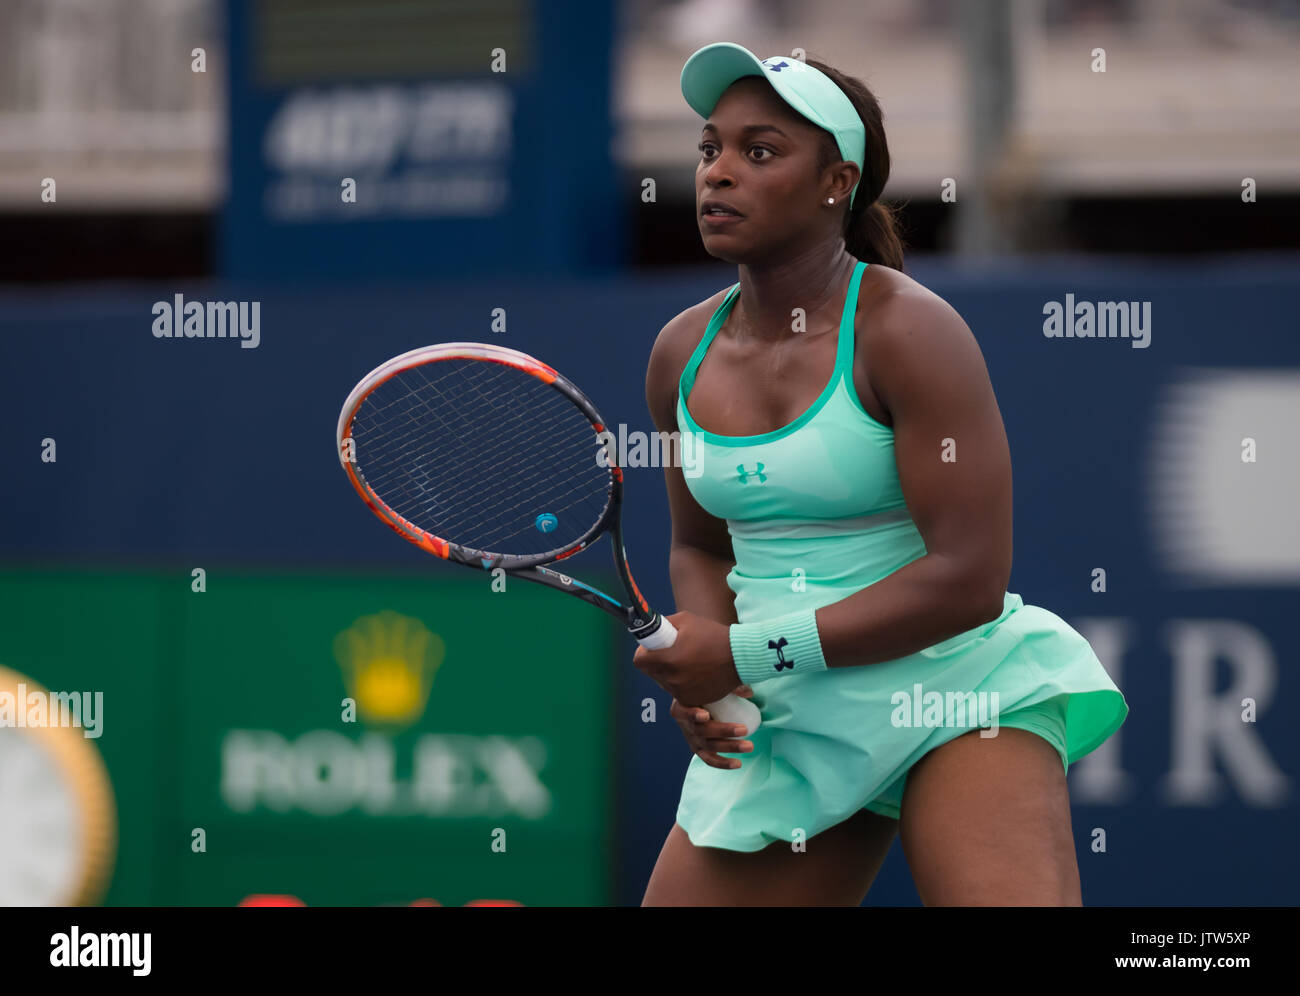 Toronto, Canada. 10 August, 2017. Sloane Stephens of the United States at  the 2017 Rogers Cup WTA Premier 5 tennis tournament © Jimmie48  Photography/Alamy Live News Stock Photo - Alamy